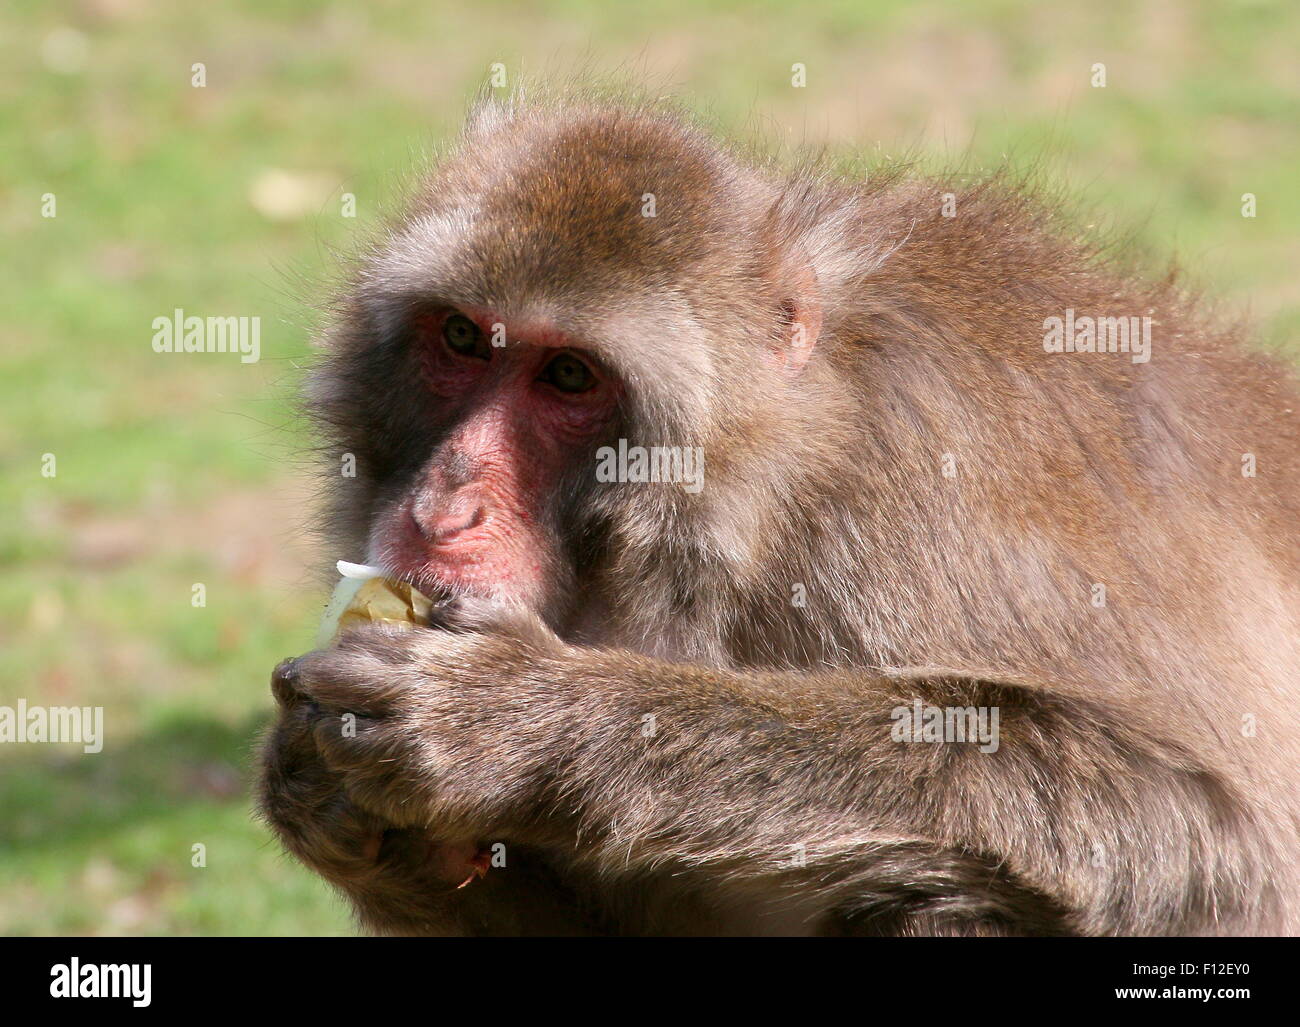 Japanese macaque or Snow monkey (Macaca fuscata) posing on a branch Stock Photo